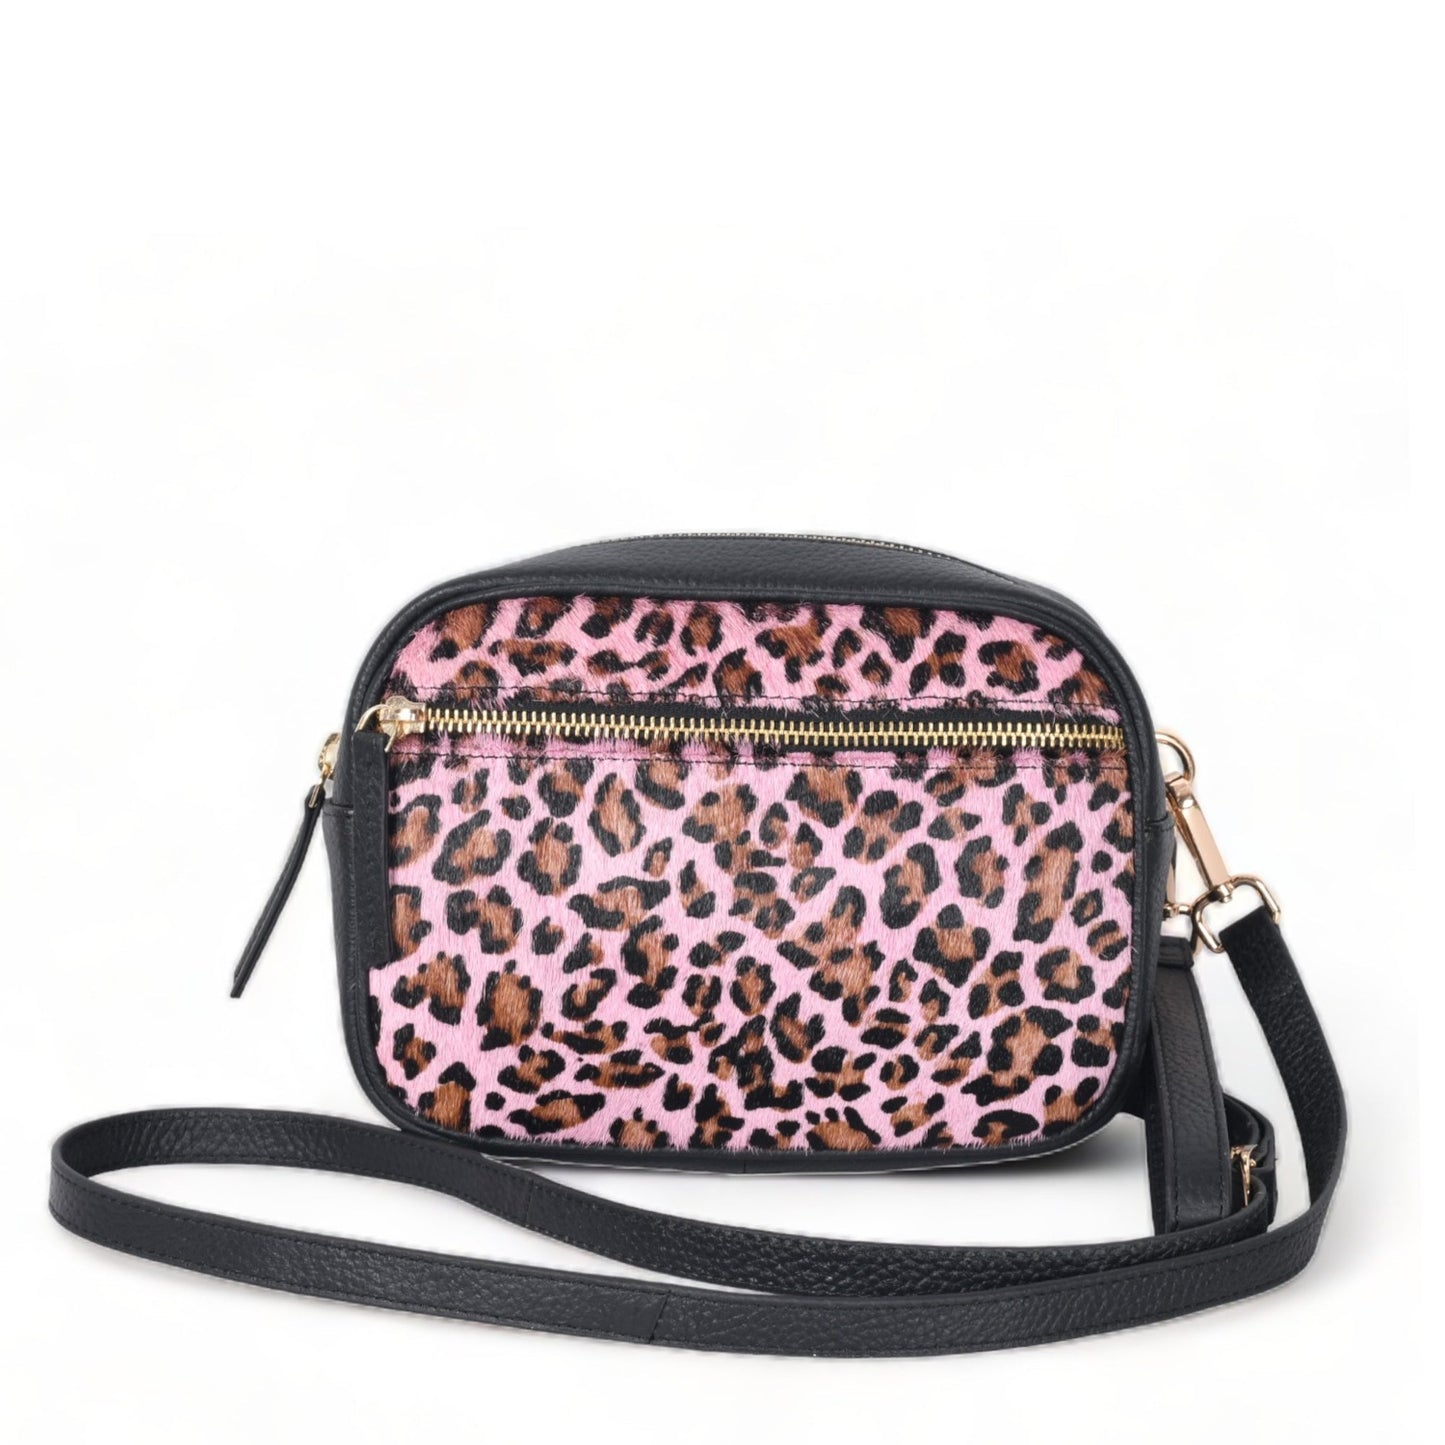 Pink Leopard Print Convertible Leather Cross Body Camera Bag Brix and Bailey Ethical Handbag Brand